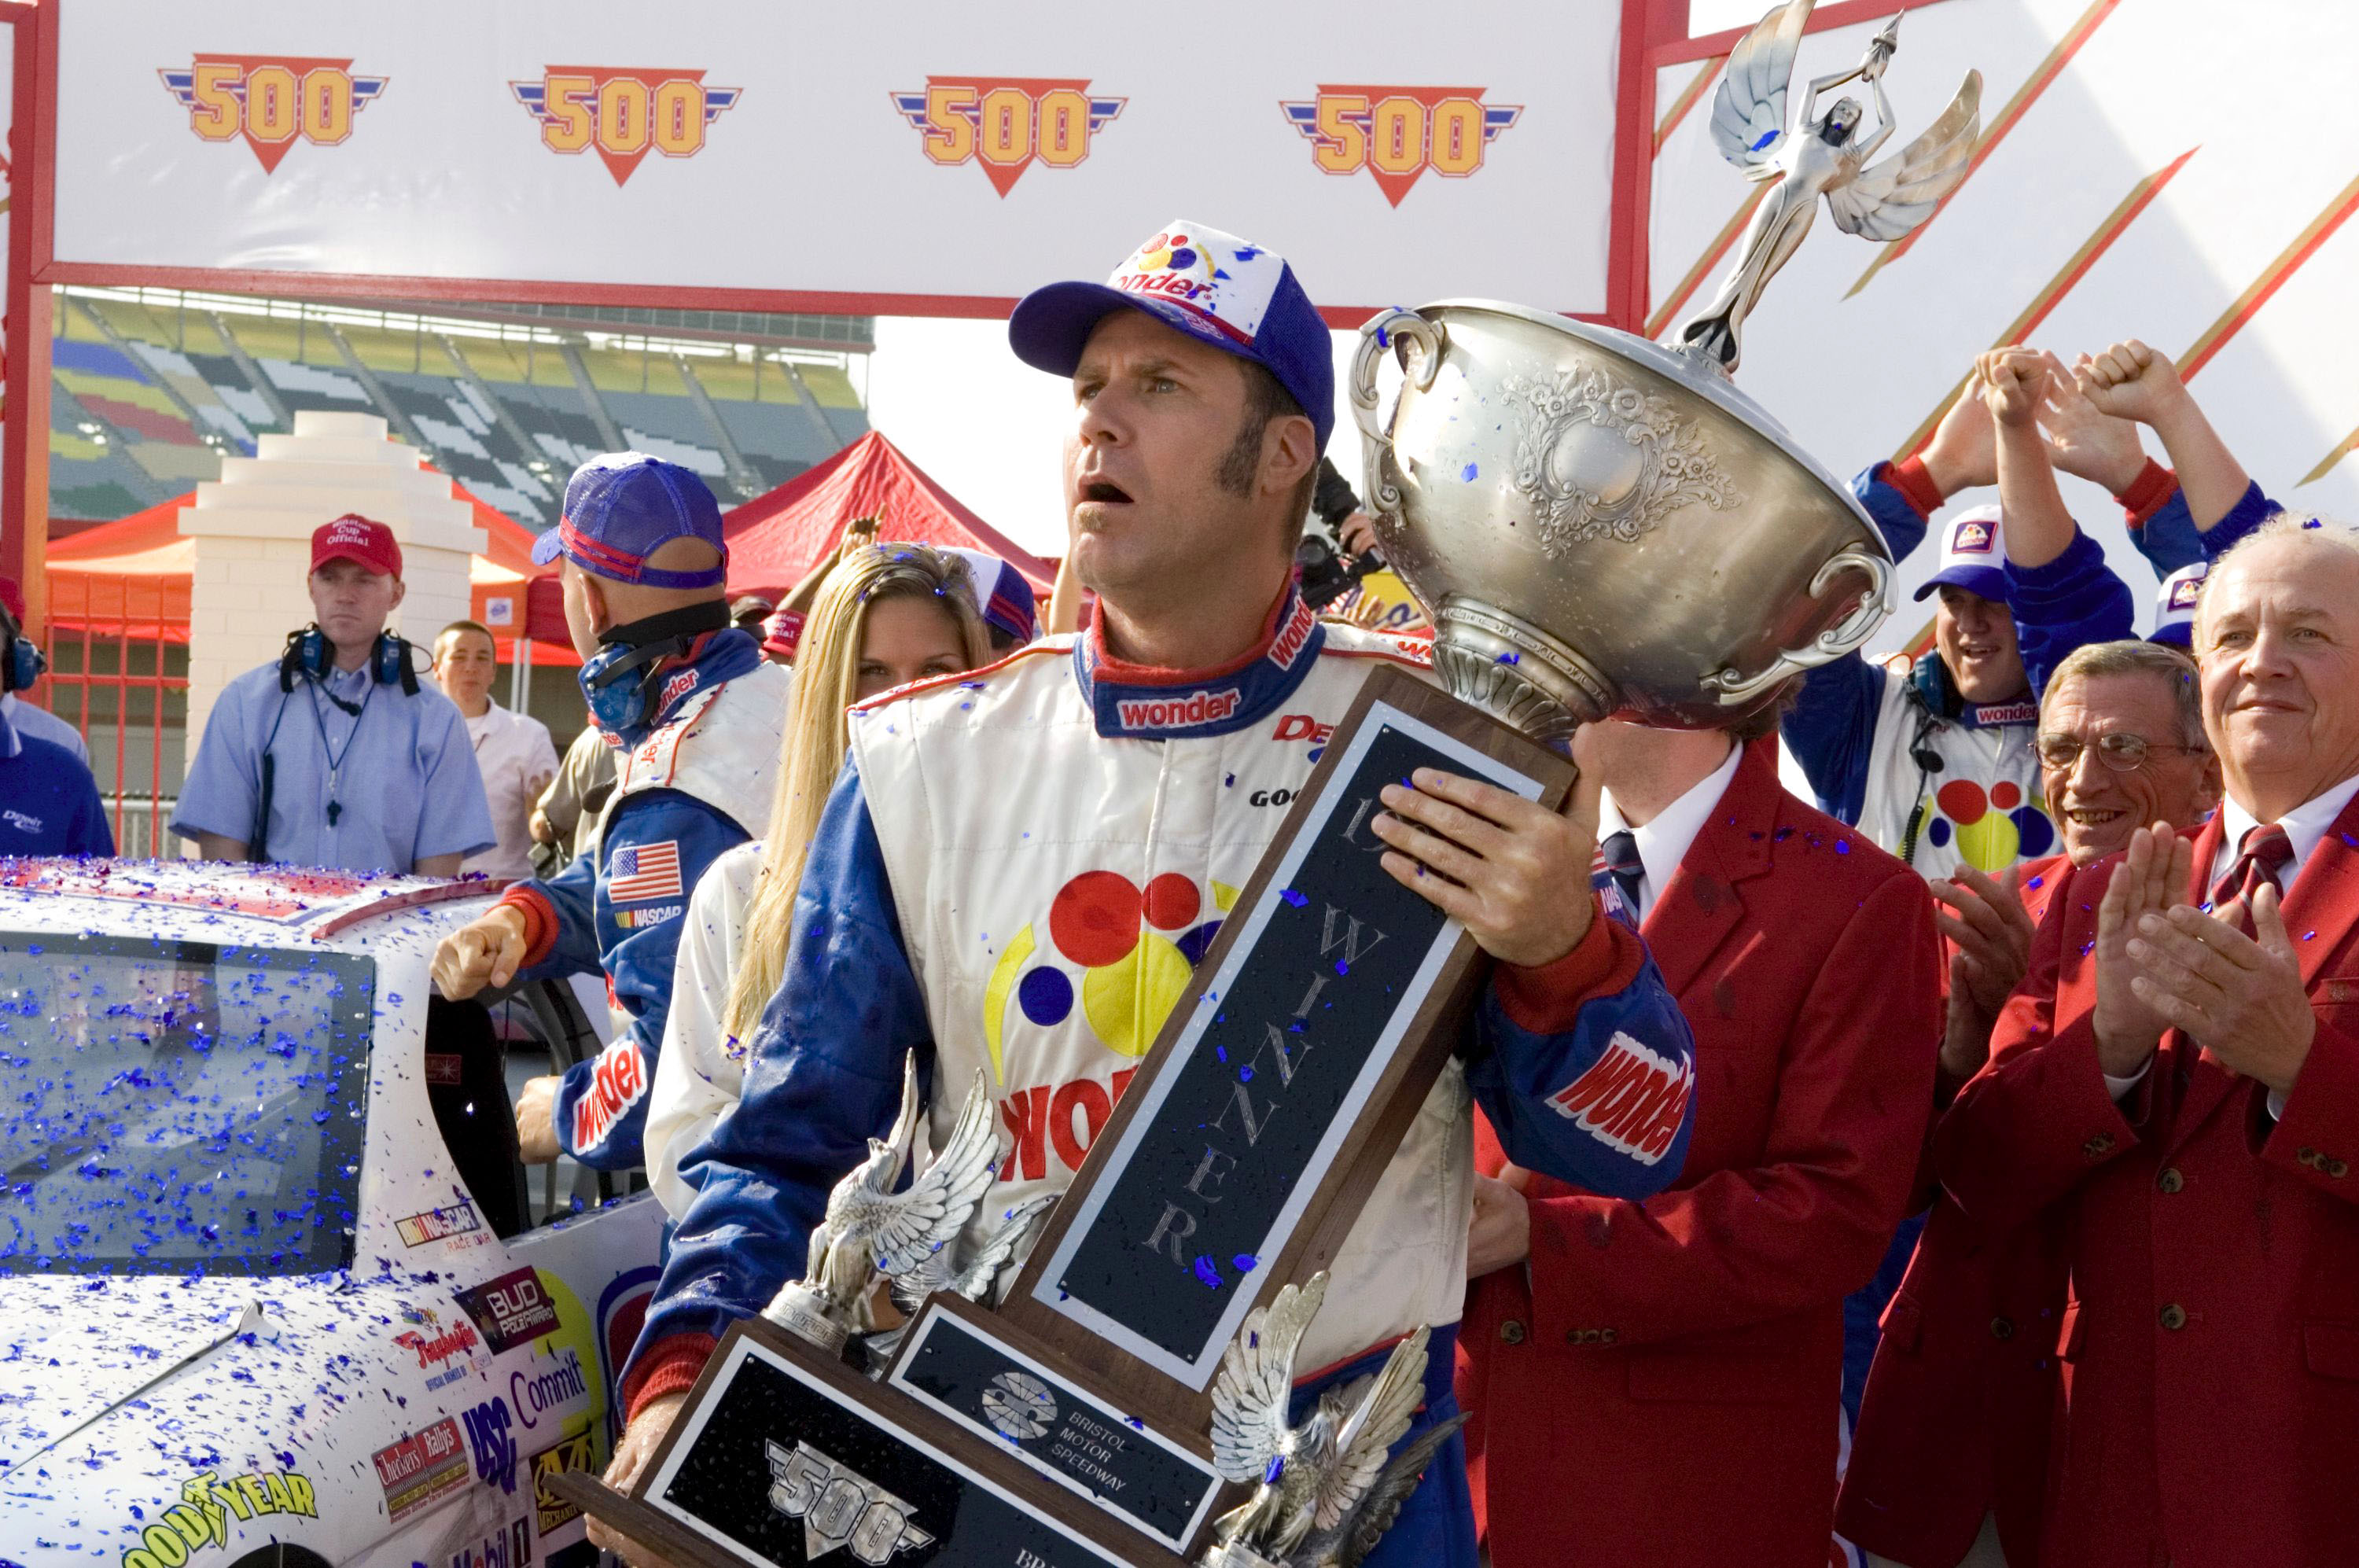 <p>Talk about hilarious! Ricky Bobby is literally one of the funniest characters we've ever seen on screen. Will Ferrell starred as the titular race car driver alongside John C. Reilly and Amy Adams in "Talladega Nights: The Ballad of Ricky Bobby." The 2006 film was a box office success, grossing $163 million and receiving praise for its "satire, clever gags and excellent ensemble performances," noted one critic.</p>